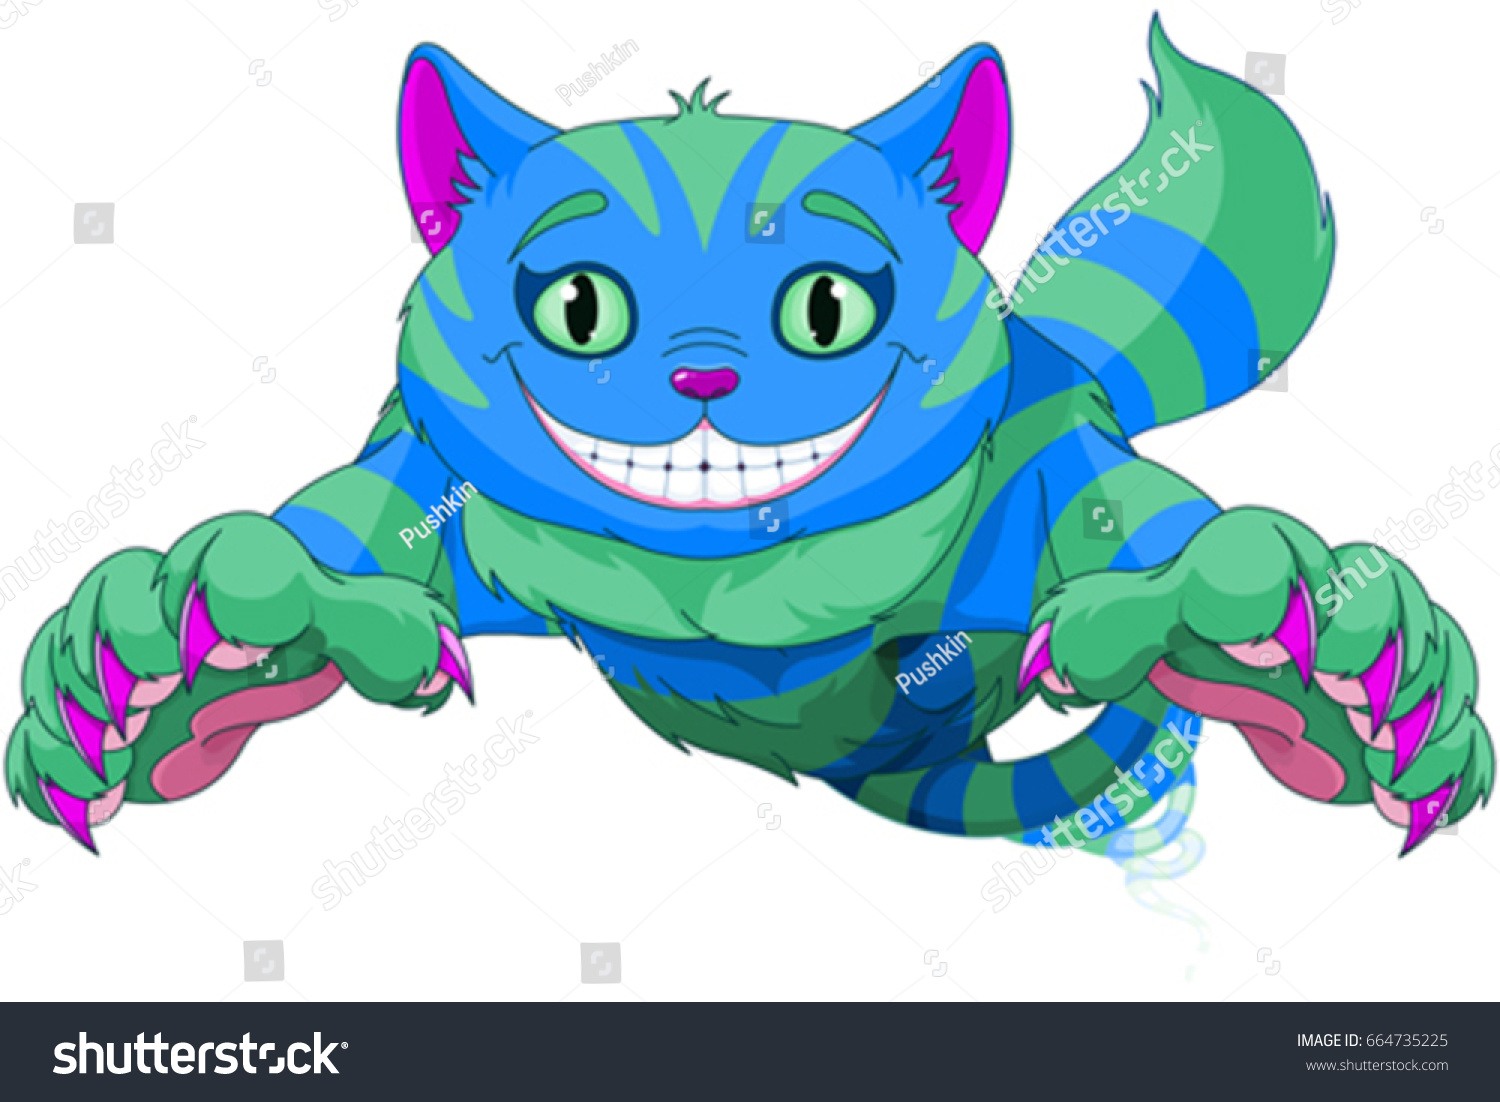 SVG of Cheshire Cat jumping and disappearing svg